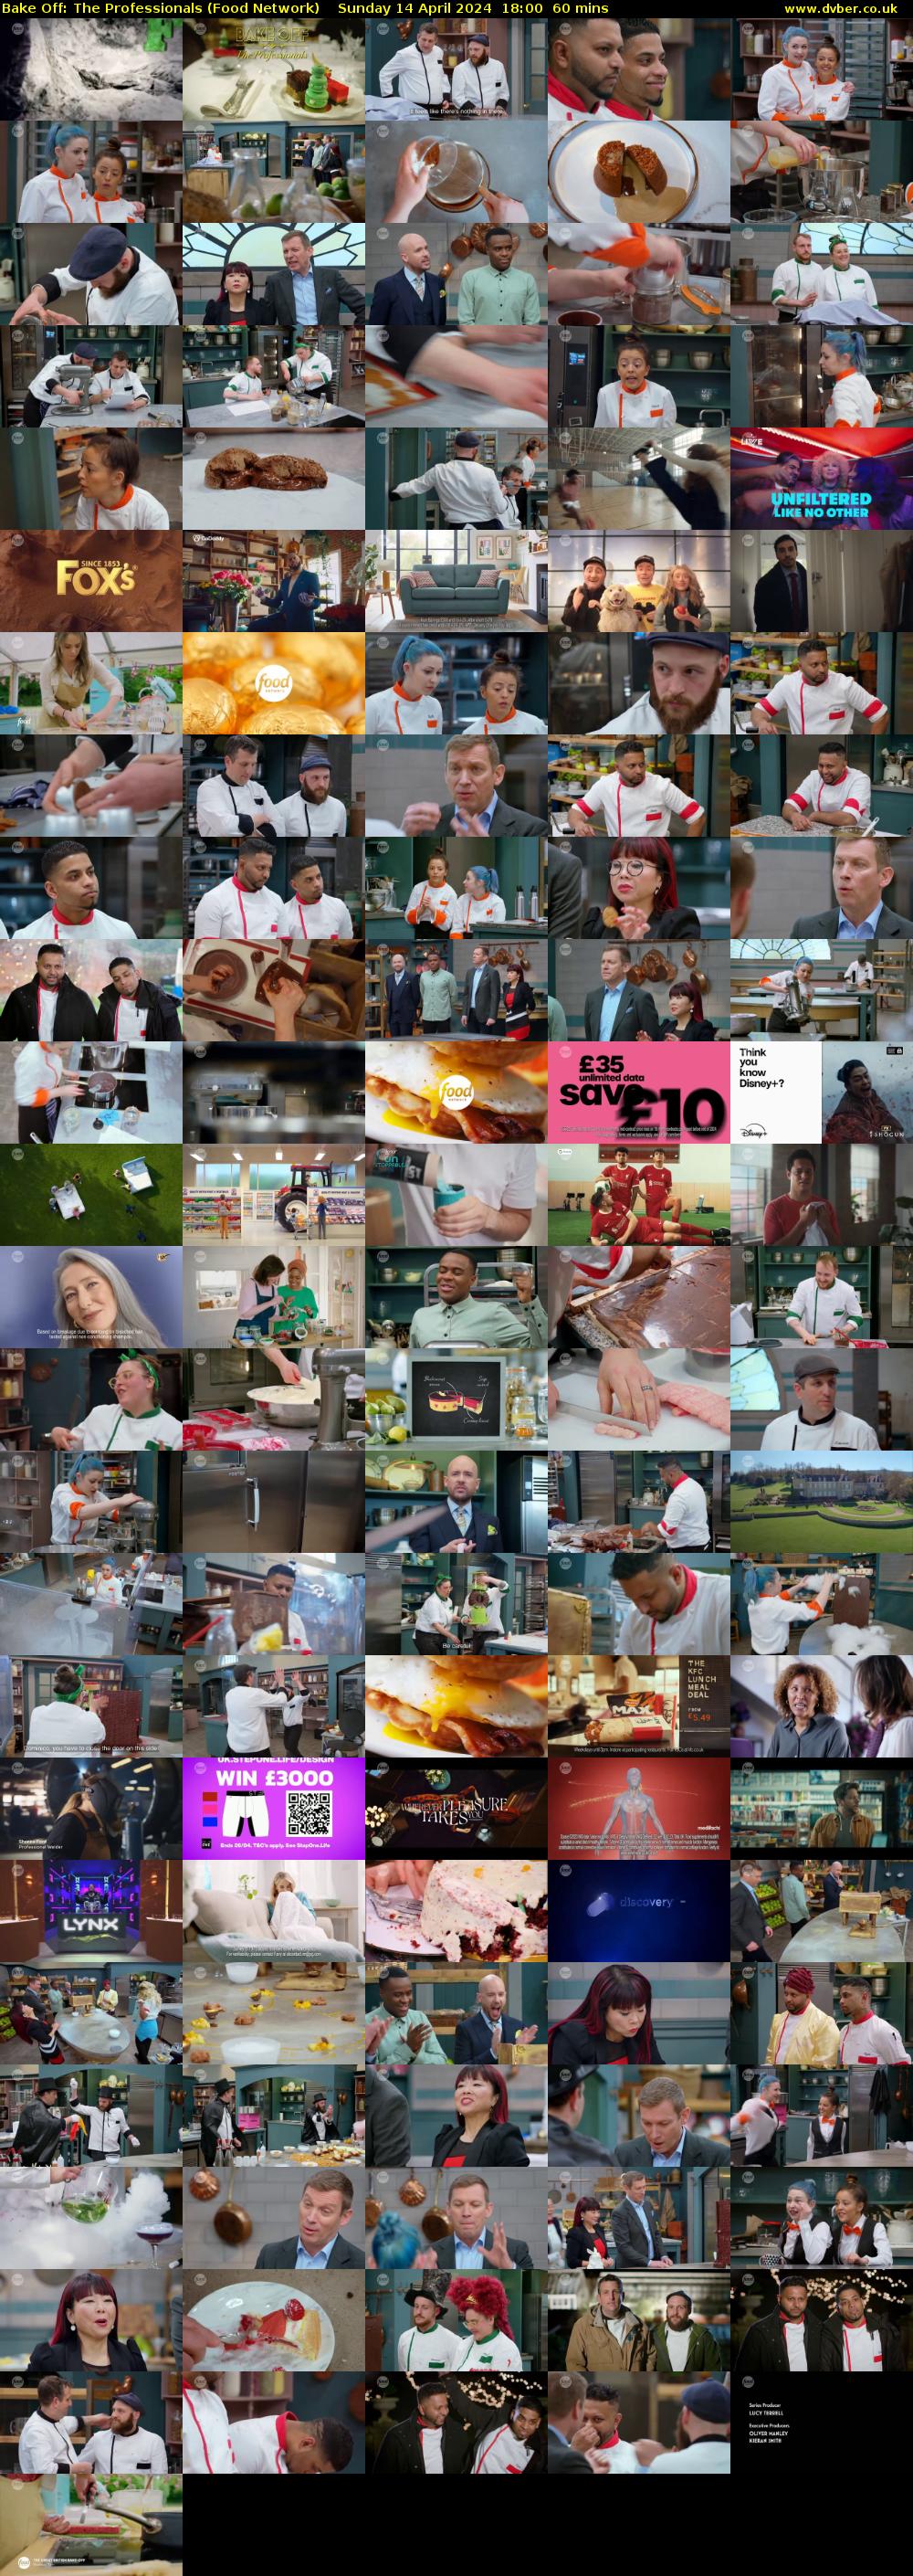 Bake Off: The Professionals (Food Network) Sunday 14 April 2024 18:00 - 19:00